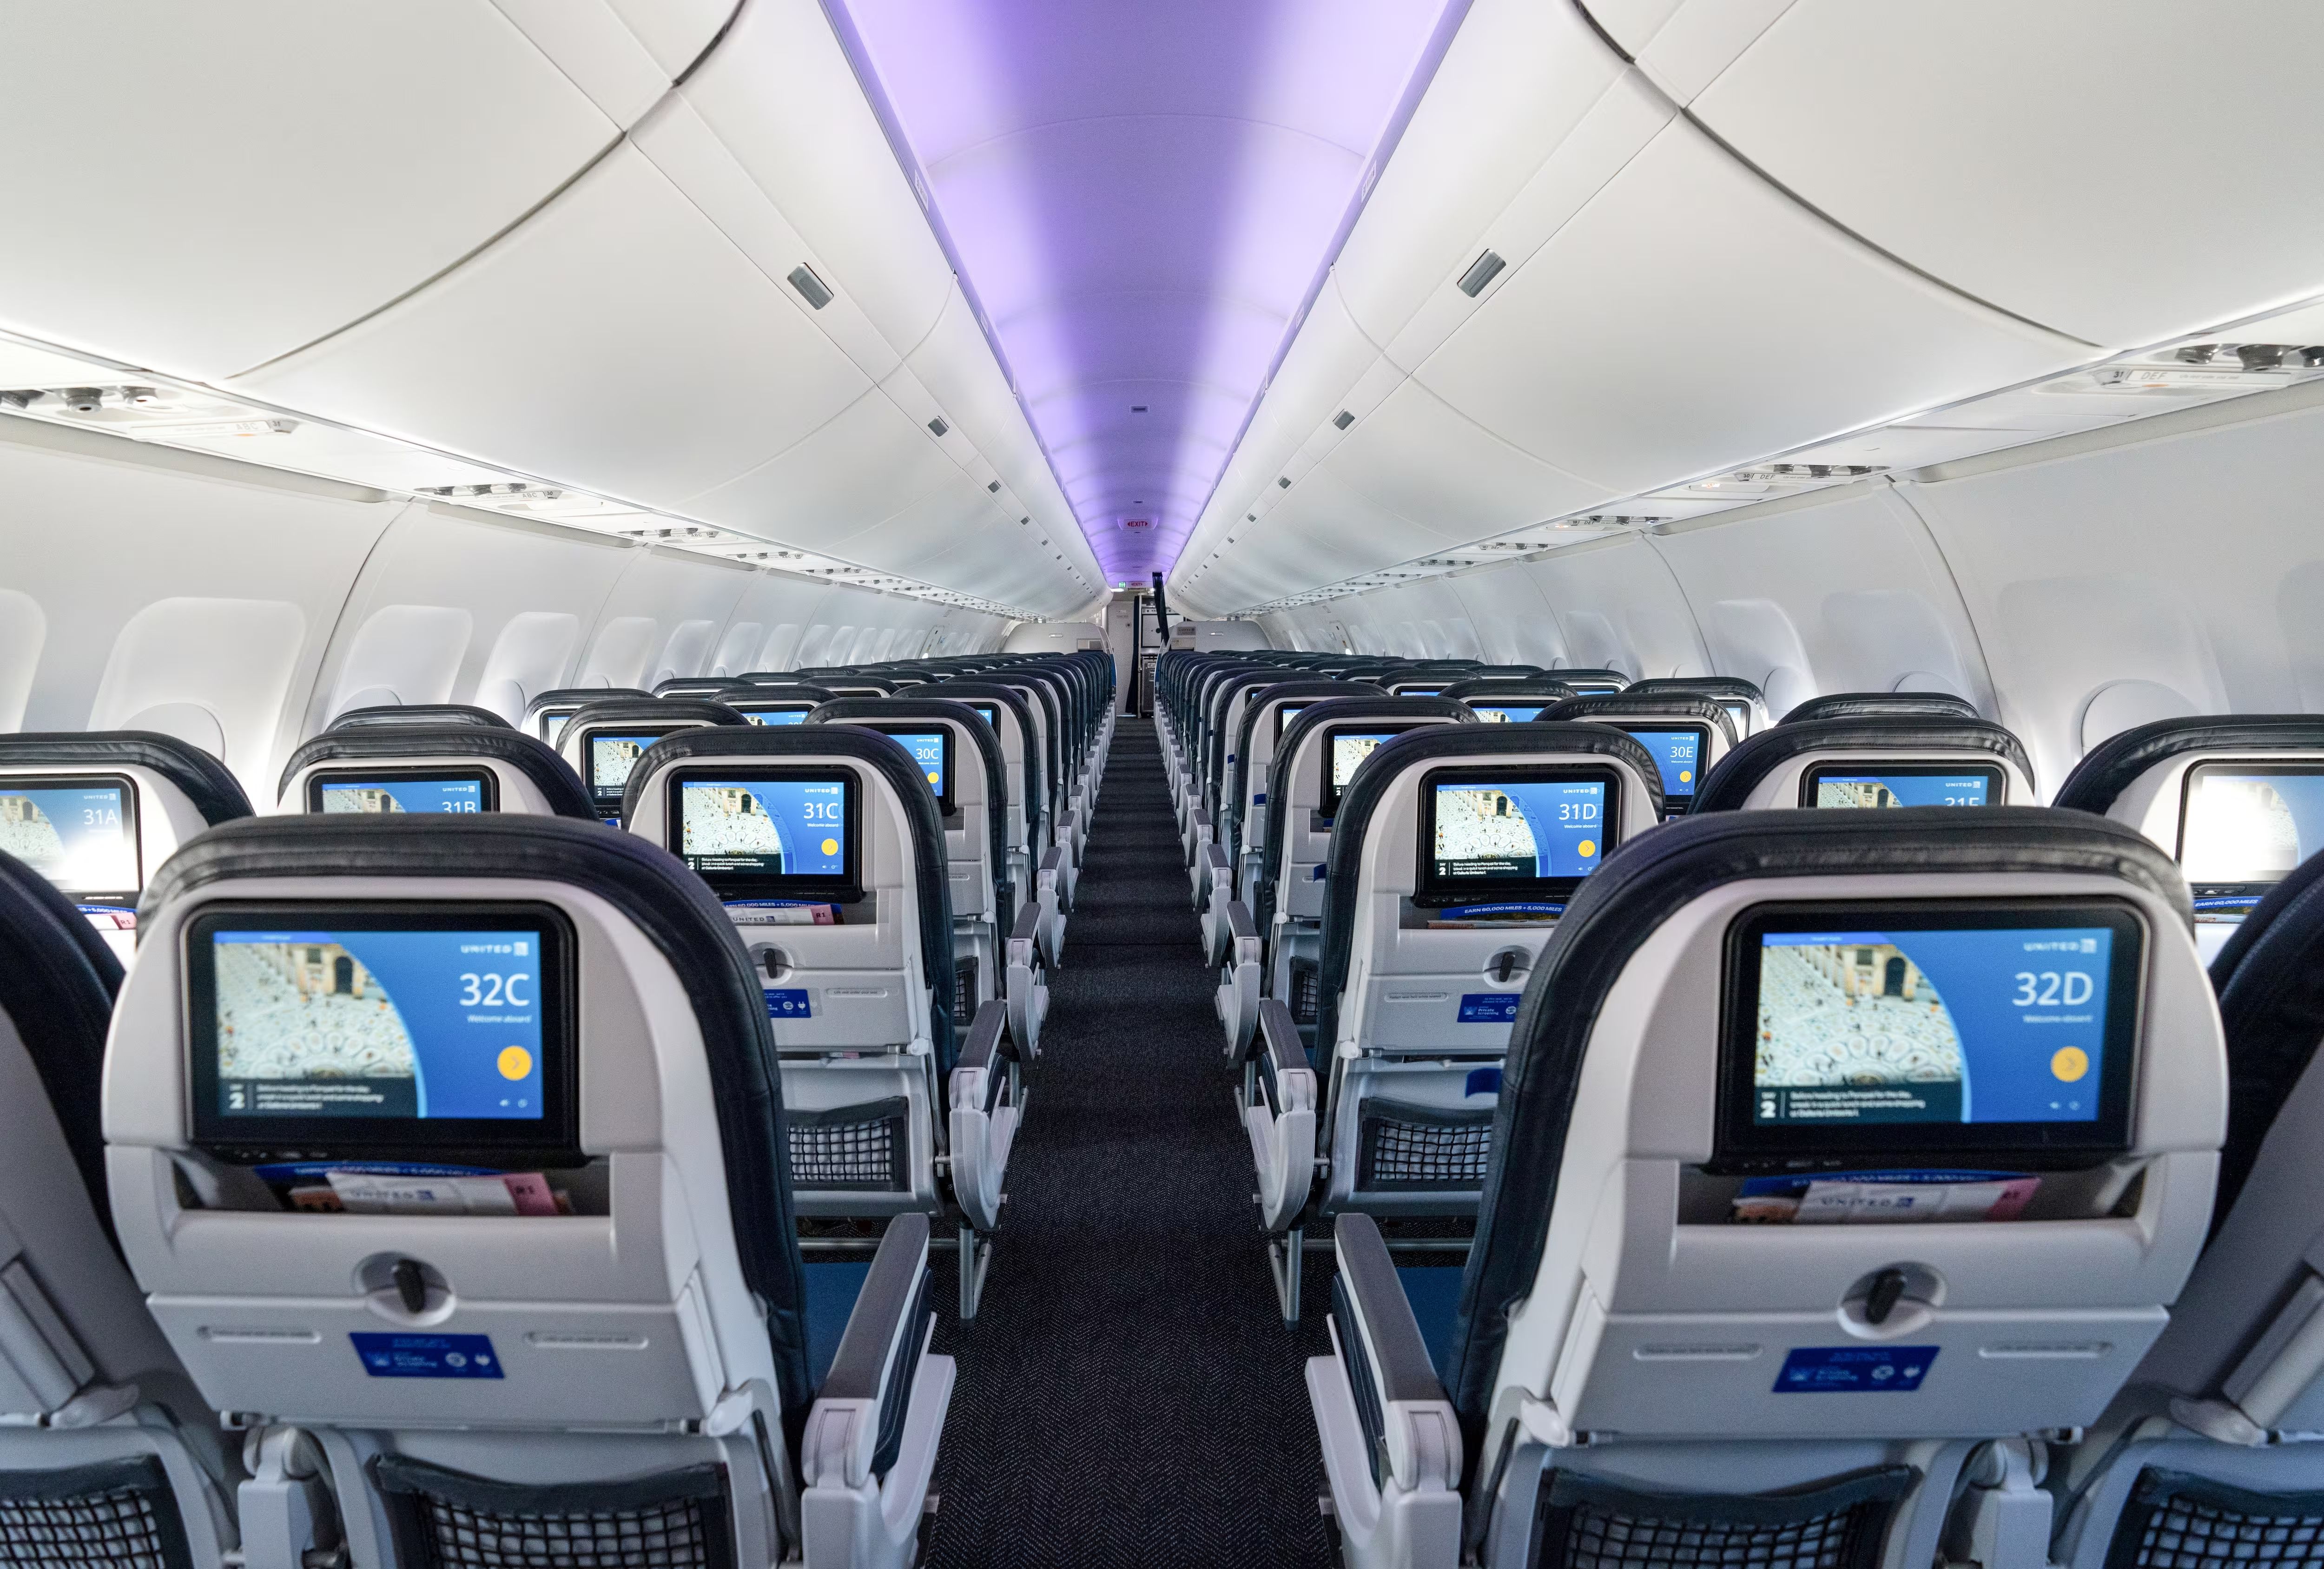 United Airlines' Airbus A319 cabin